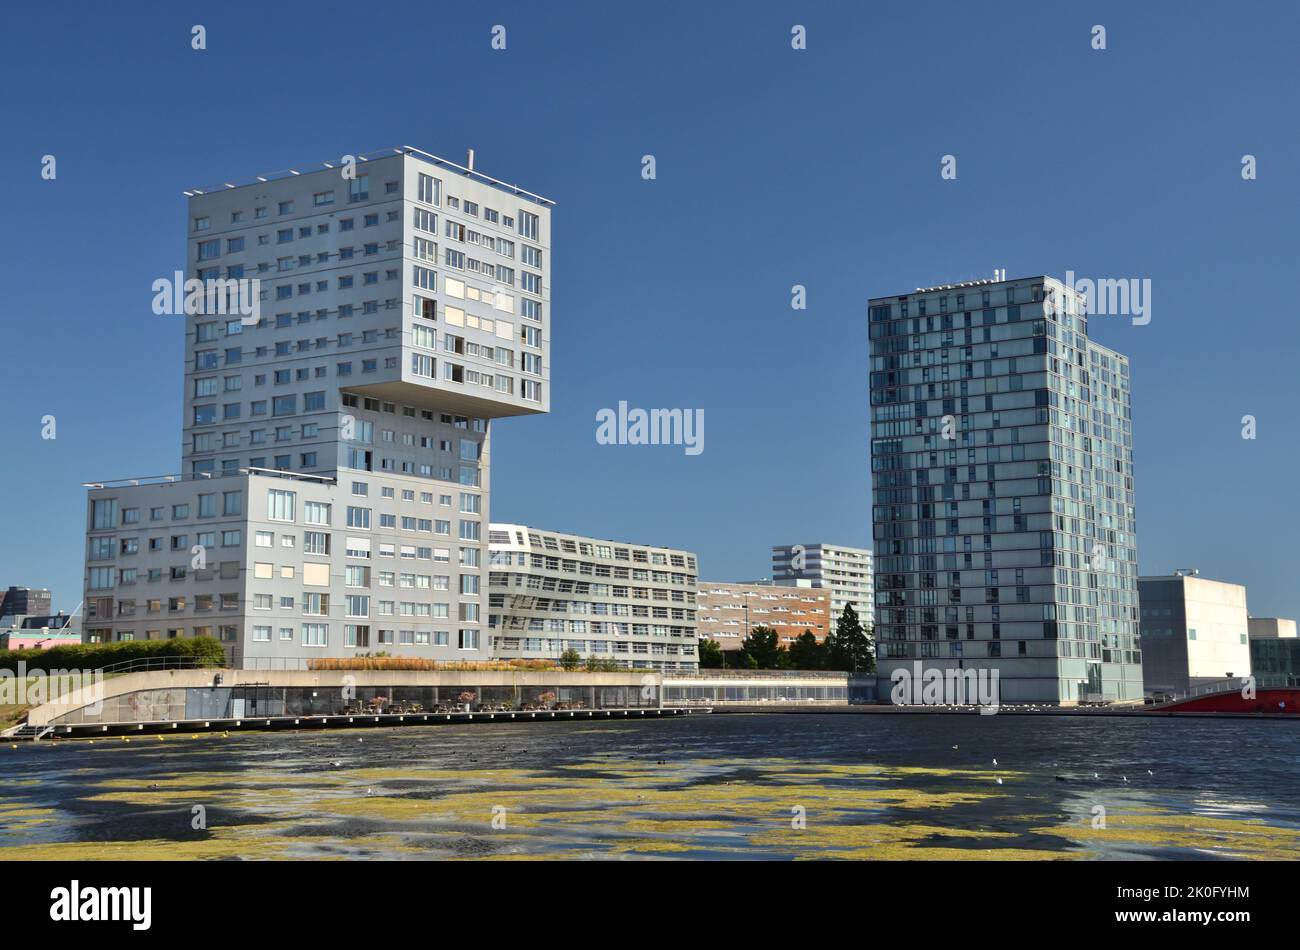 Modern architecture in the new planned city of Almere, Netherlands Stock Photo